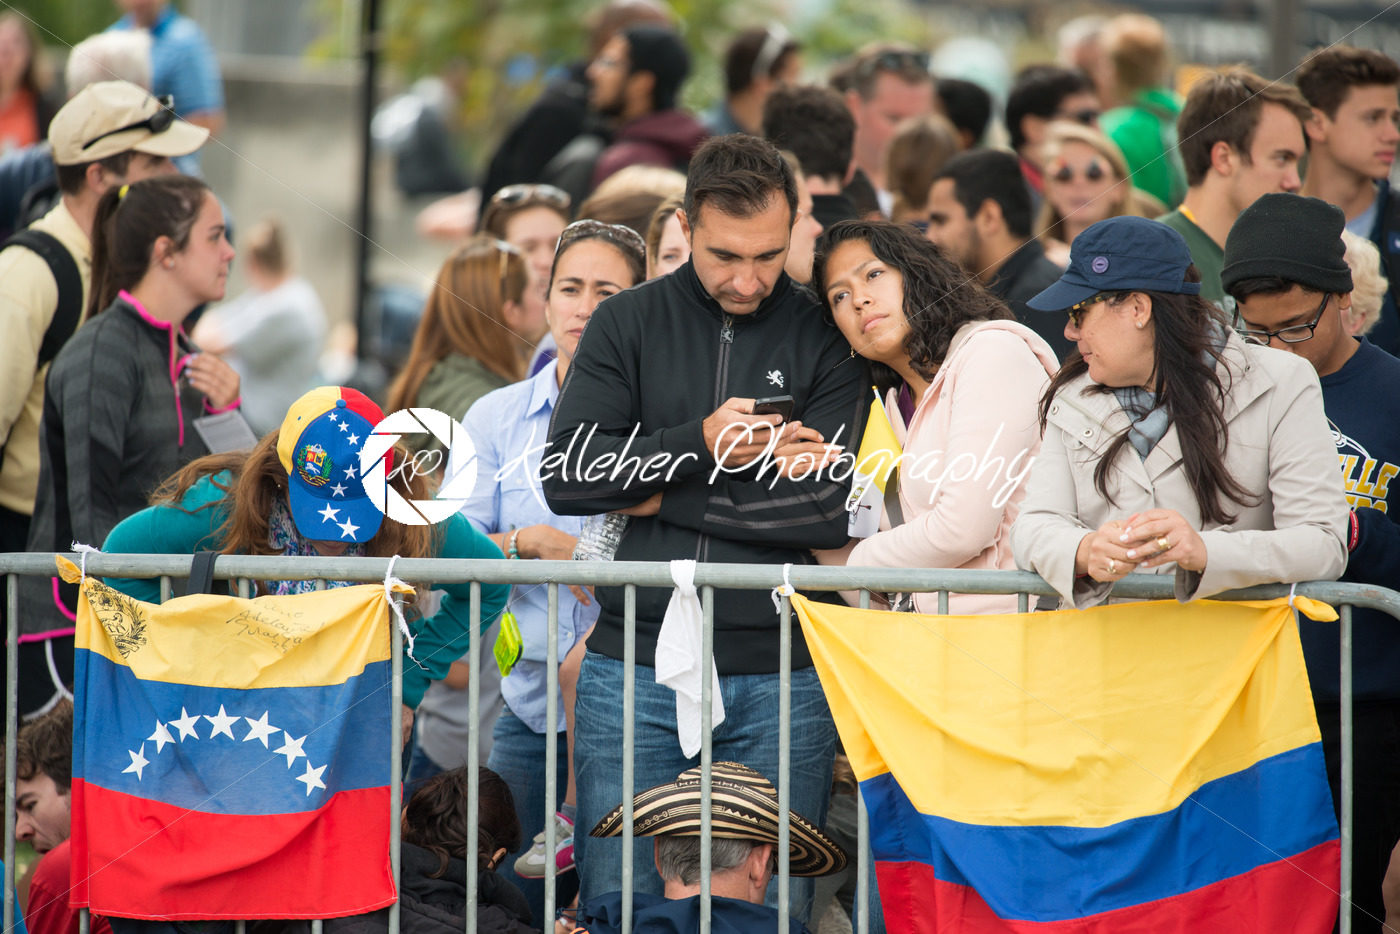 PHILADELPHIA, PA – SEPTEMBER 26: Crowds of people arrive on the Benjamin Franklin Parkway in Center City Philadelphia to see Pope Francis at the World Meeting of Families on September 26, 2015 - Kelleher Photography Store